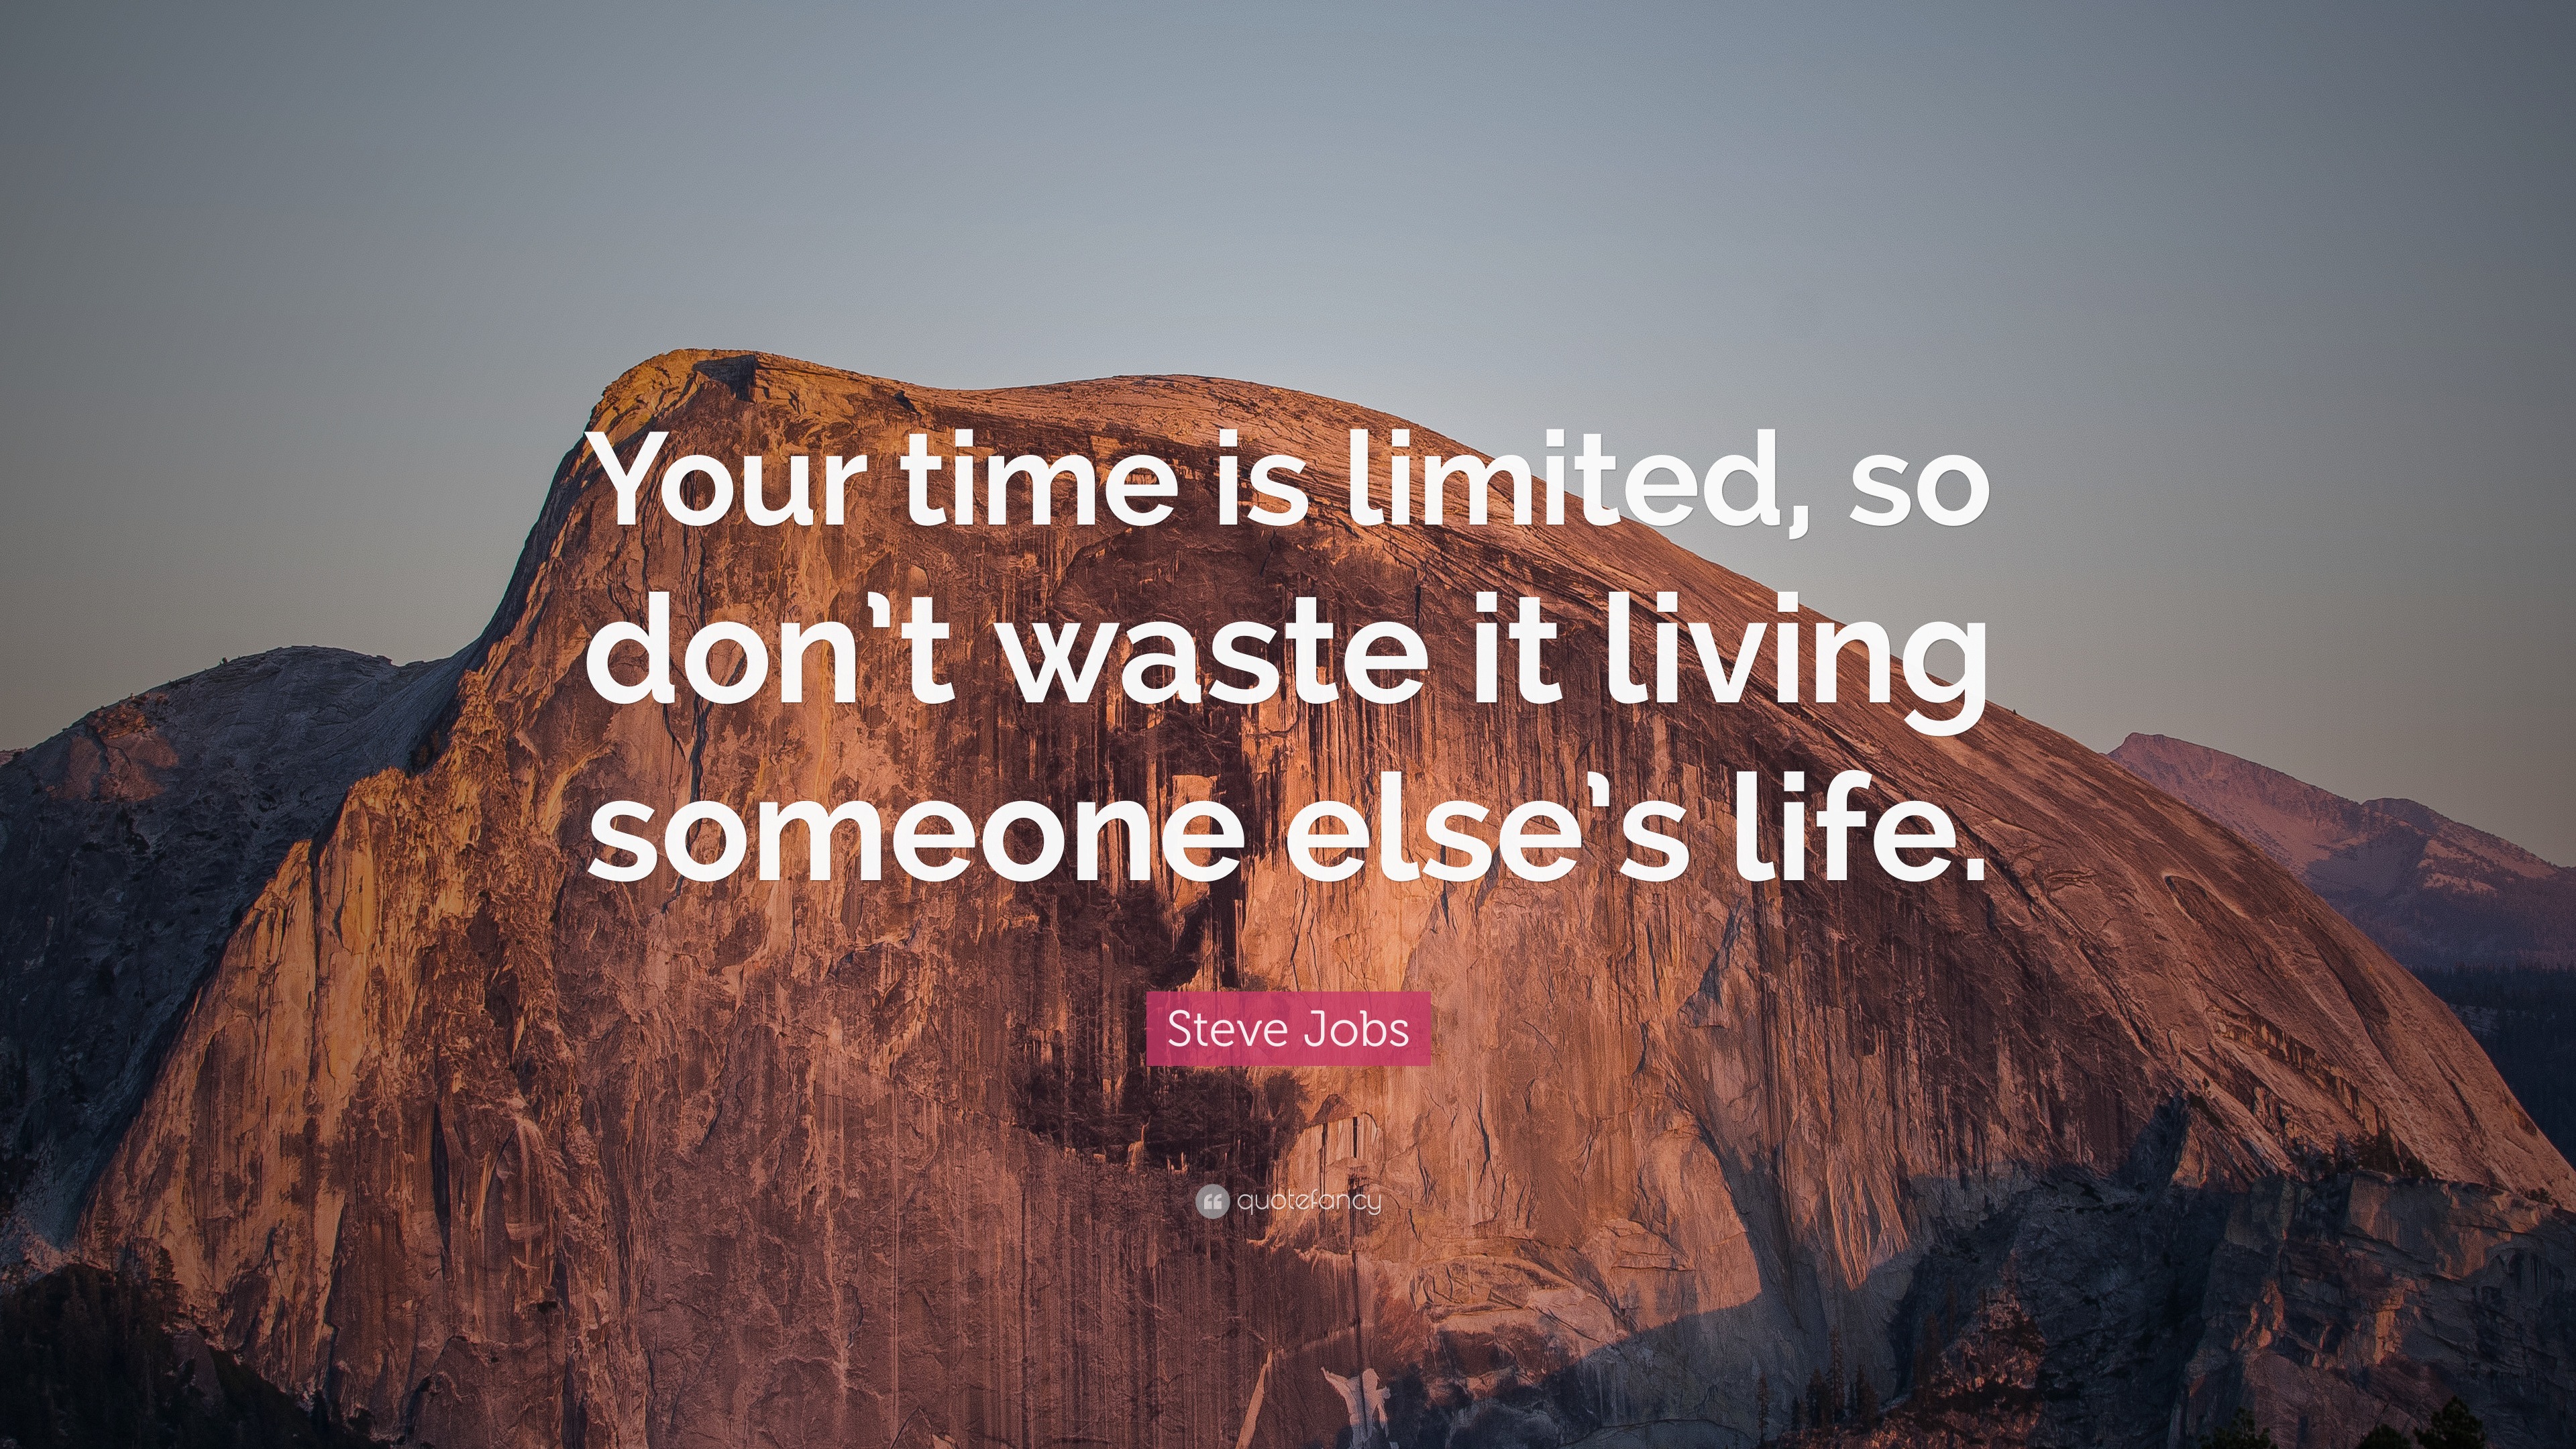 Steve Jobs Quote: “Your time is limited, so don’t waste it living